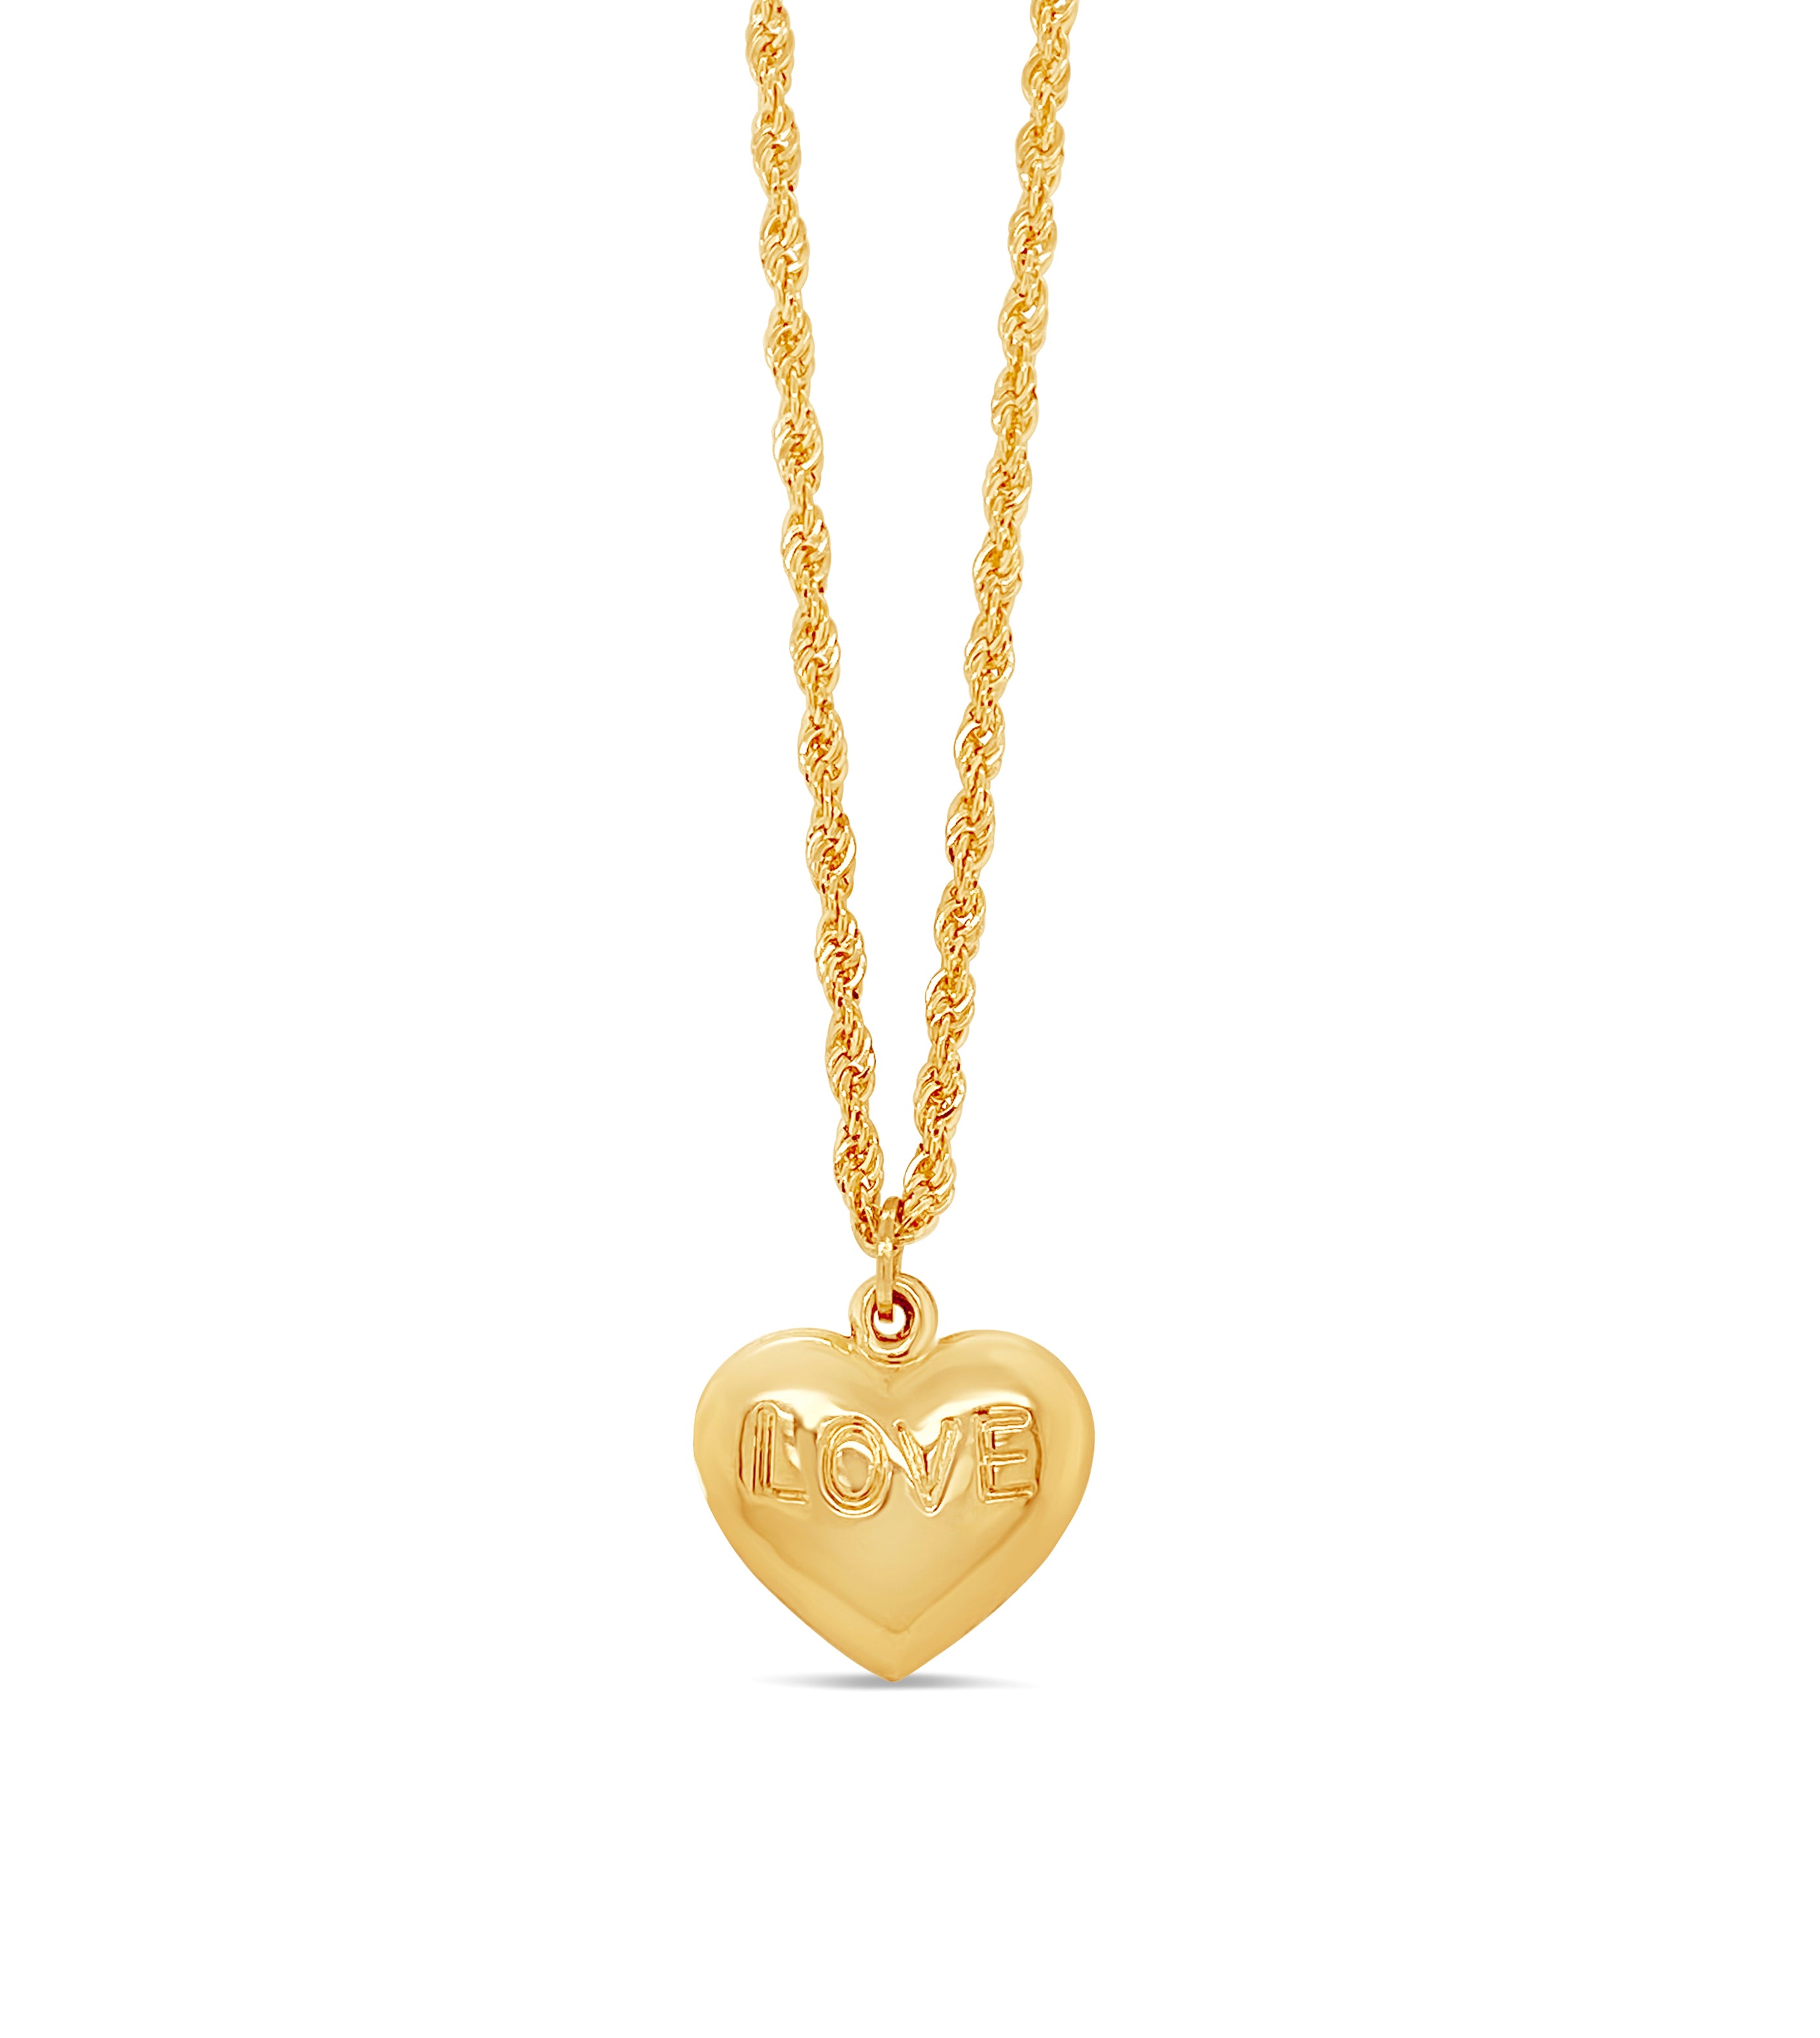 Gold Puffy Heart Pendant and Gold Filled Necklace, Puffed Heart, Hammered,  Matte Gold, Heart of Gold, Simple, Gold Jewelry, Mother's Day - Etsy | Heart  pendant, Gold fill necklace, Puffy heart